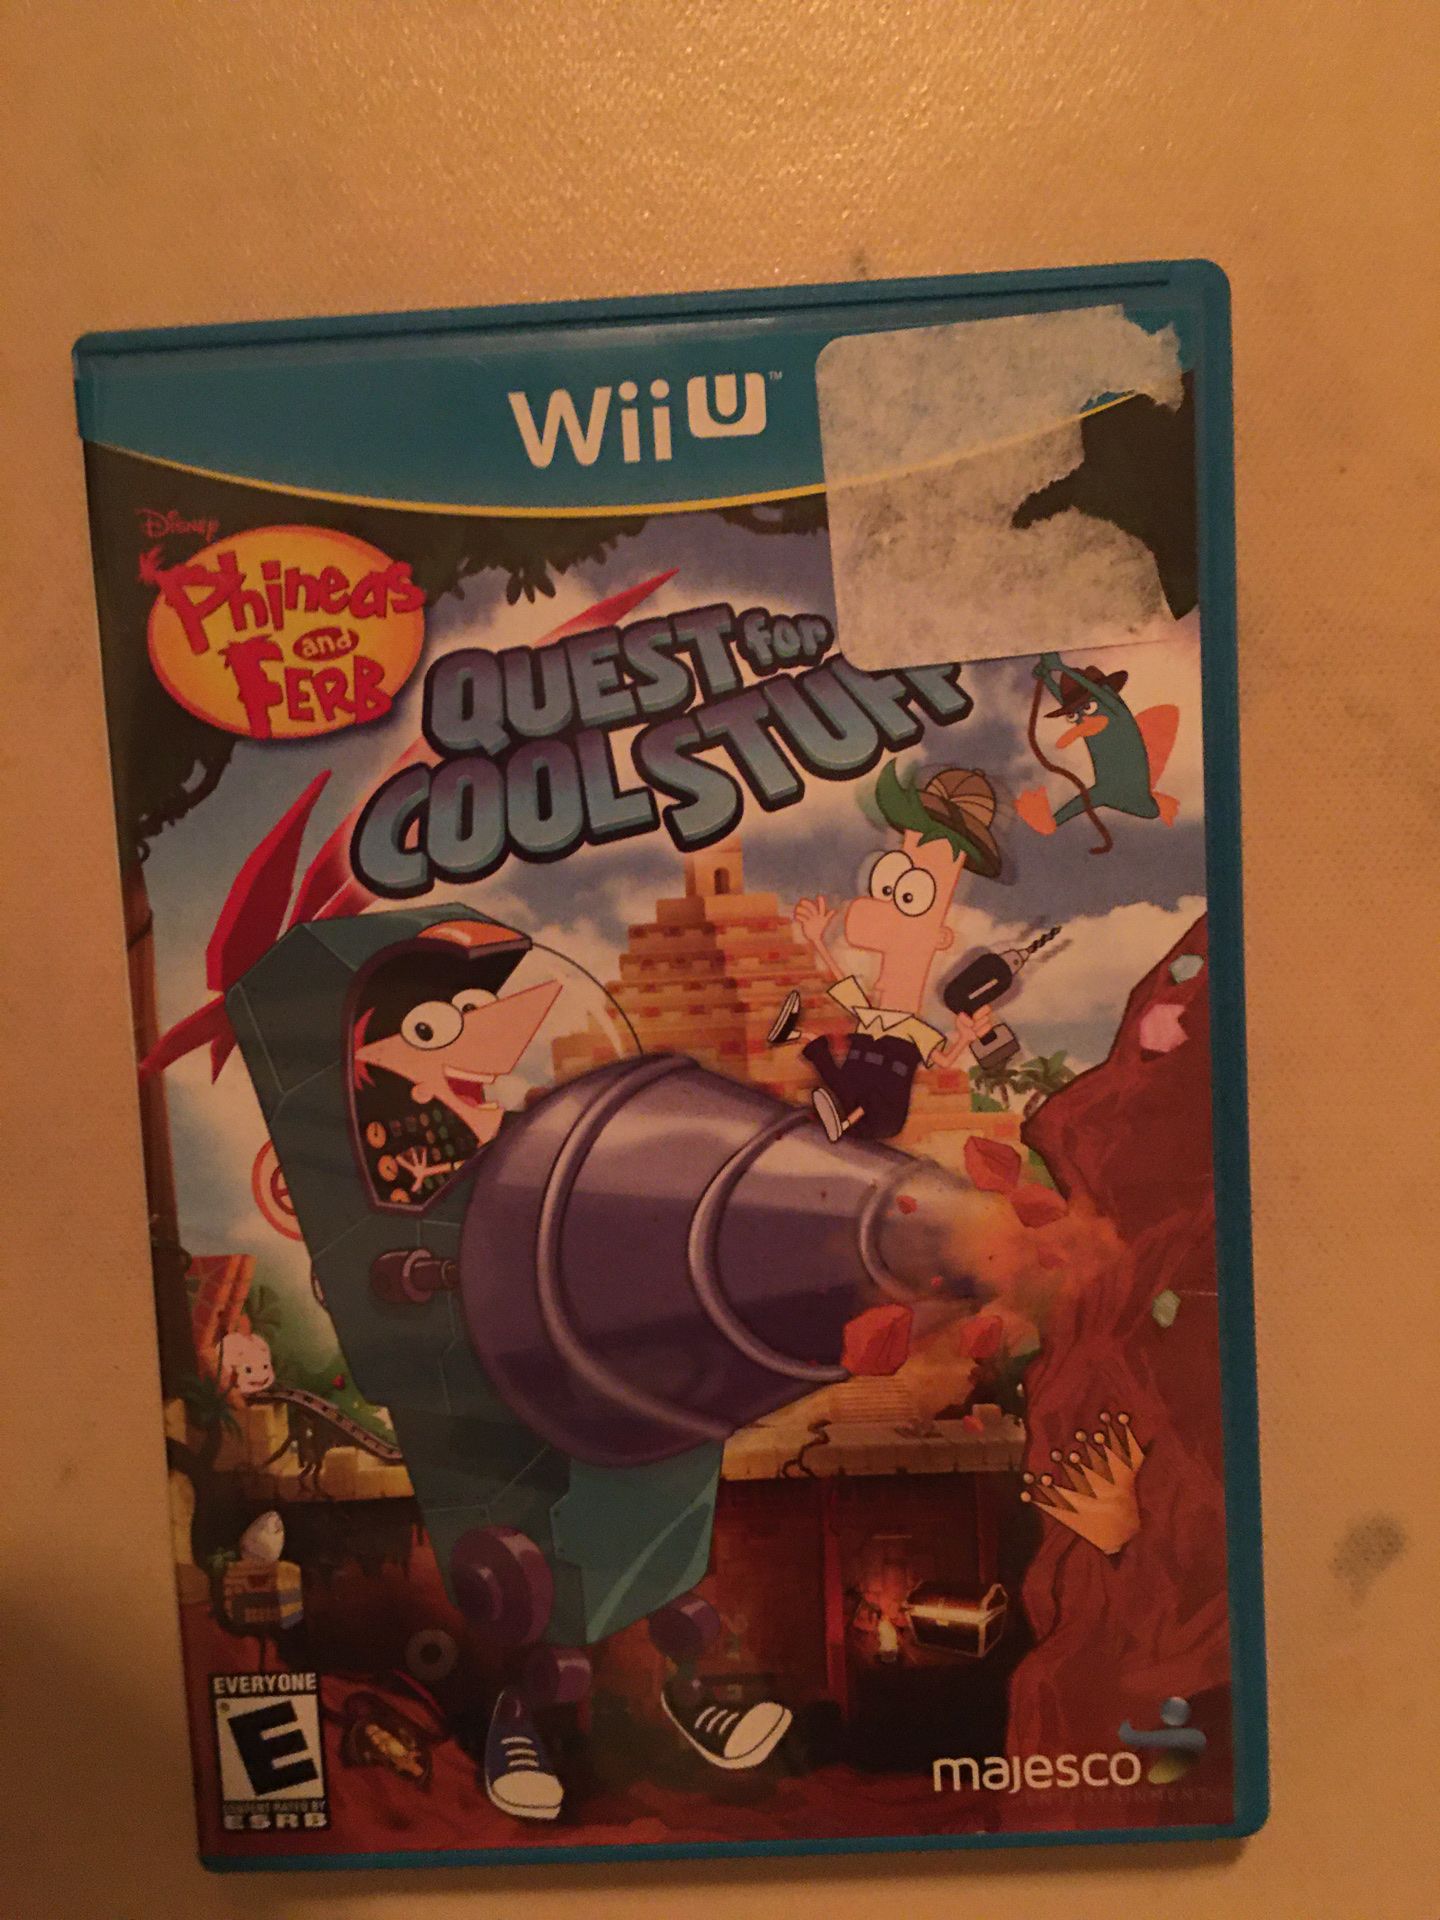 Nintendo Wii U Disney phineas and ferb quest for cool stuff